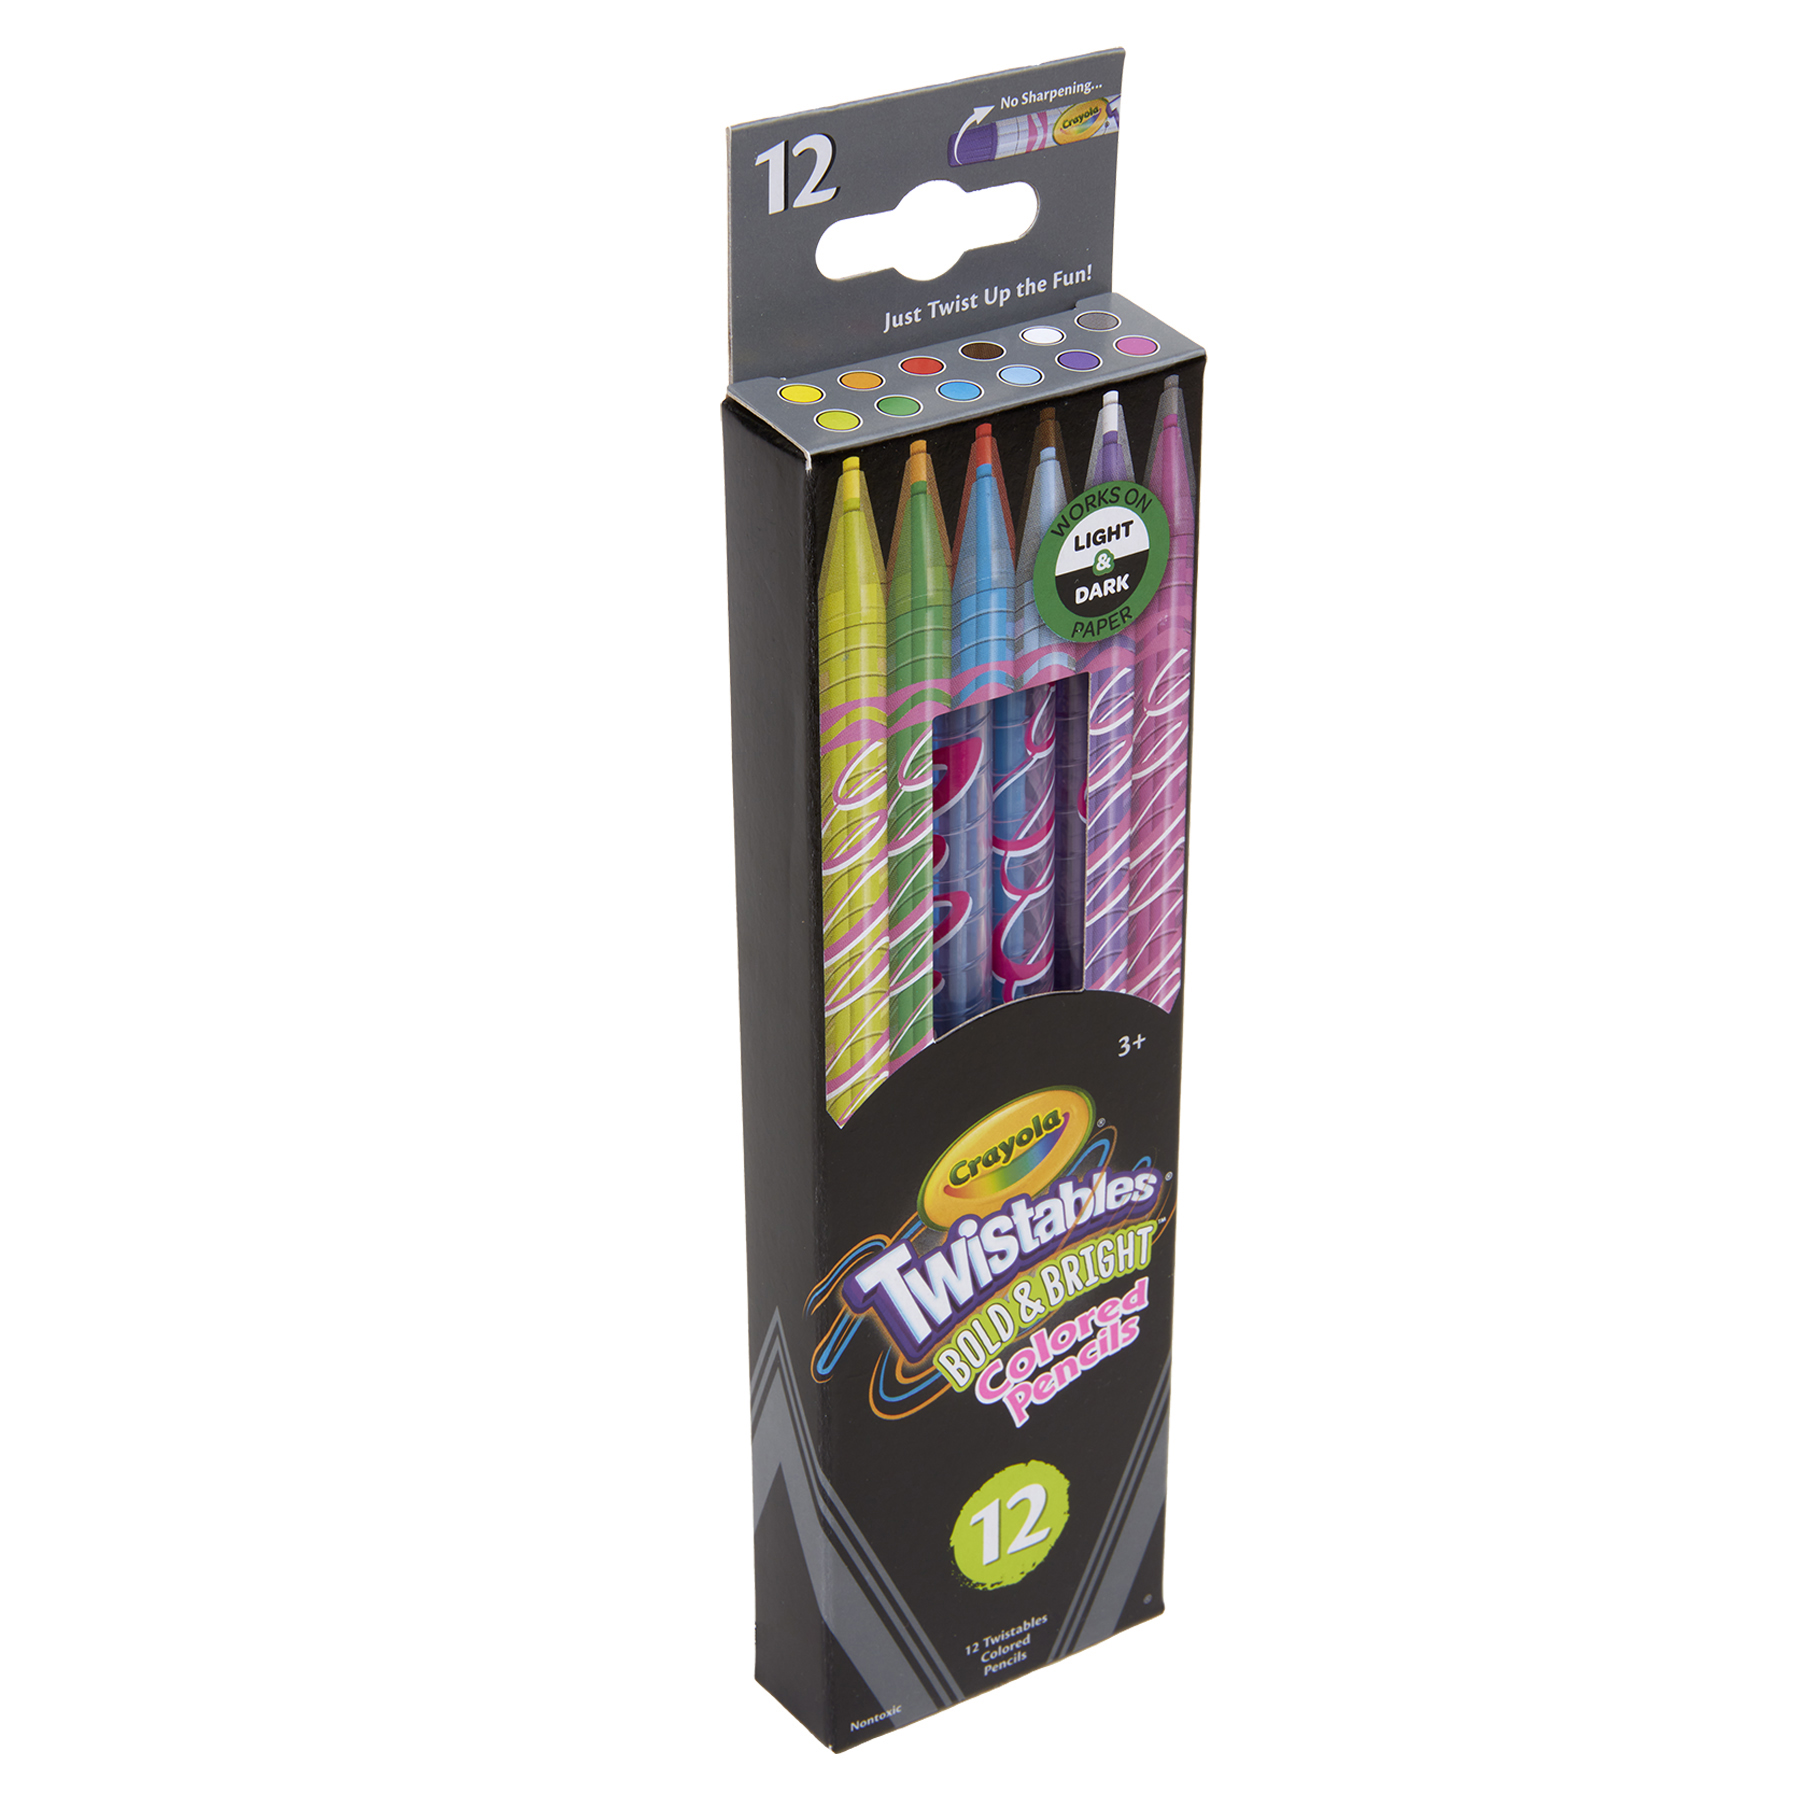 Crayola Sharpened Bright Bold Colors Non-Toxic Colored Pencils (12 Pack) 